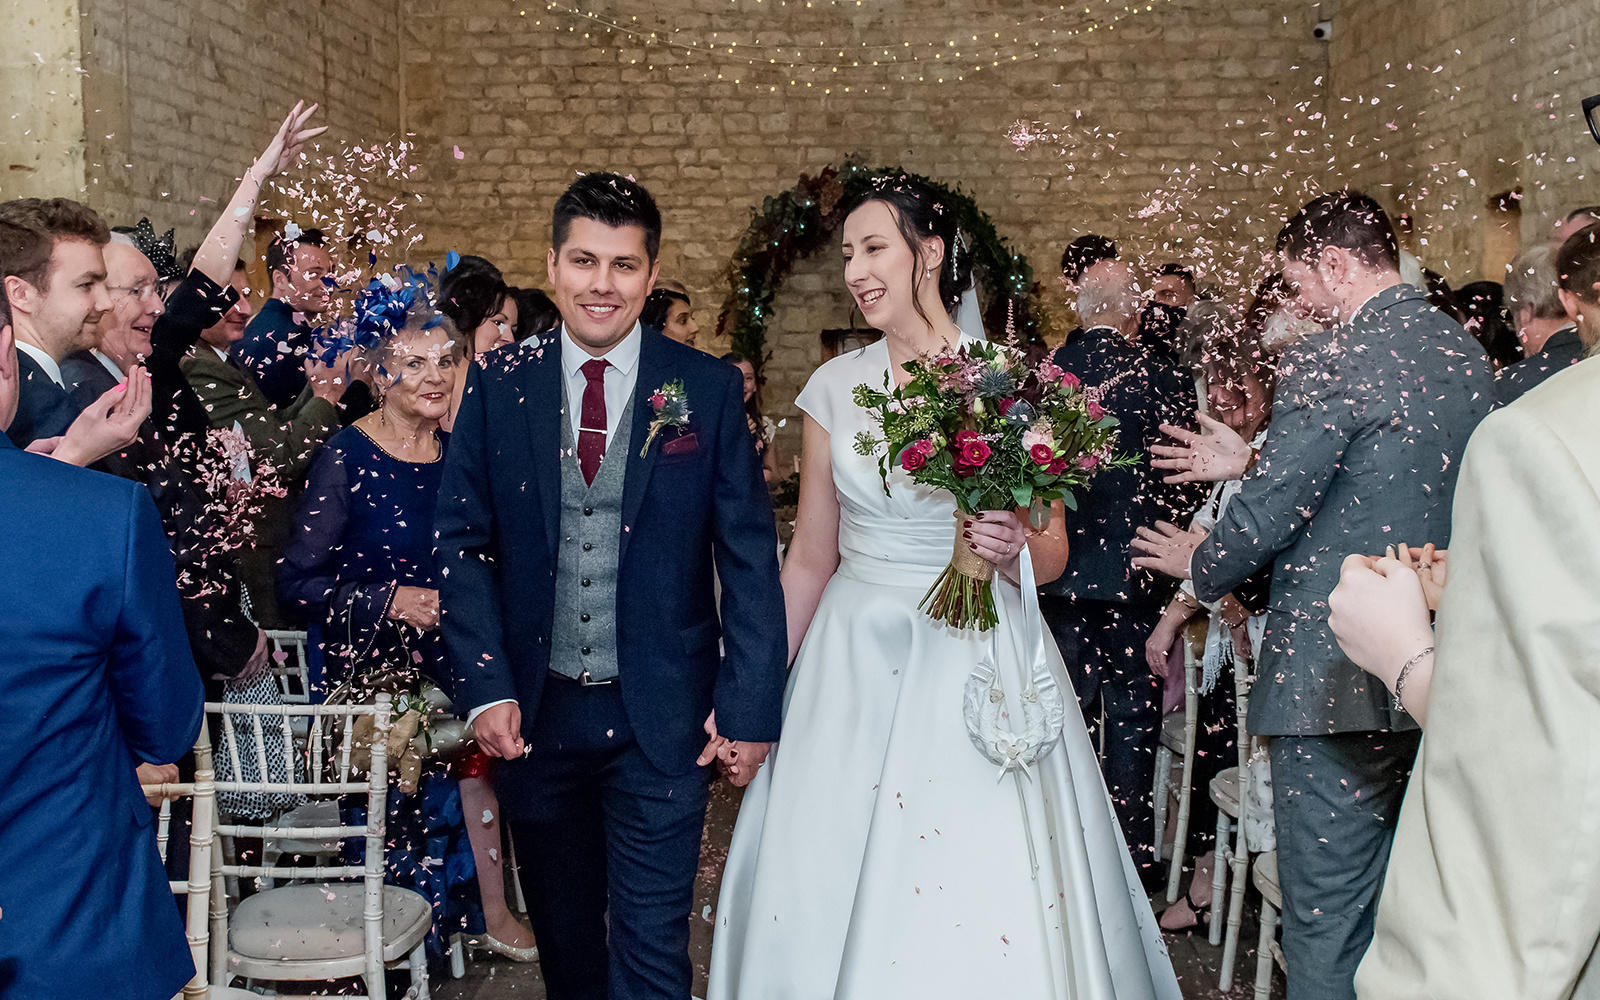 Capture Every Moment wedding photography duo from Cirencester reportage traditional photographers Lapstone Barn Chipping Campden Cotswolds venue Bride Groom walk down the aisle